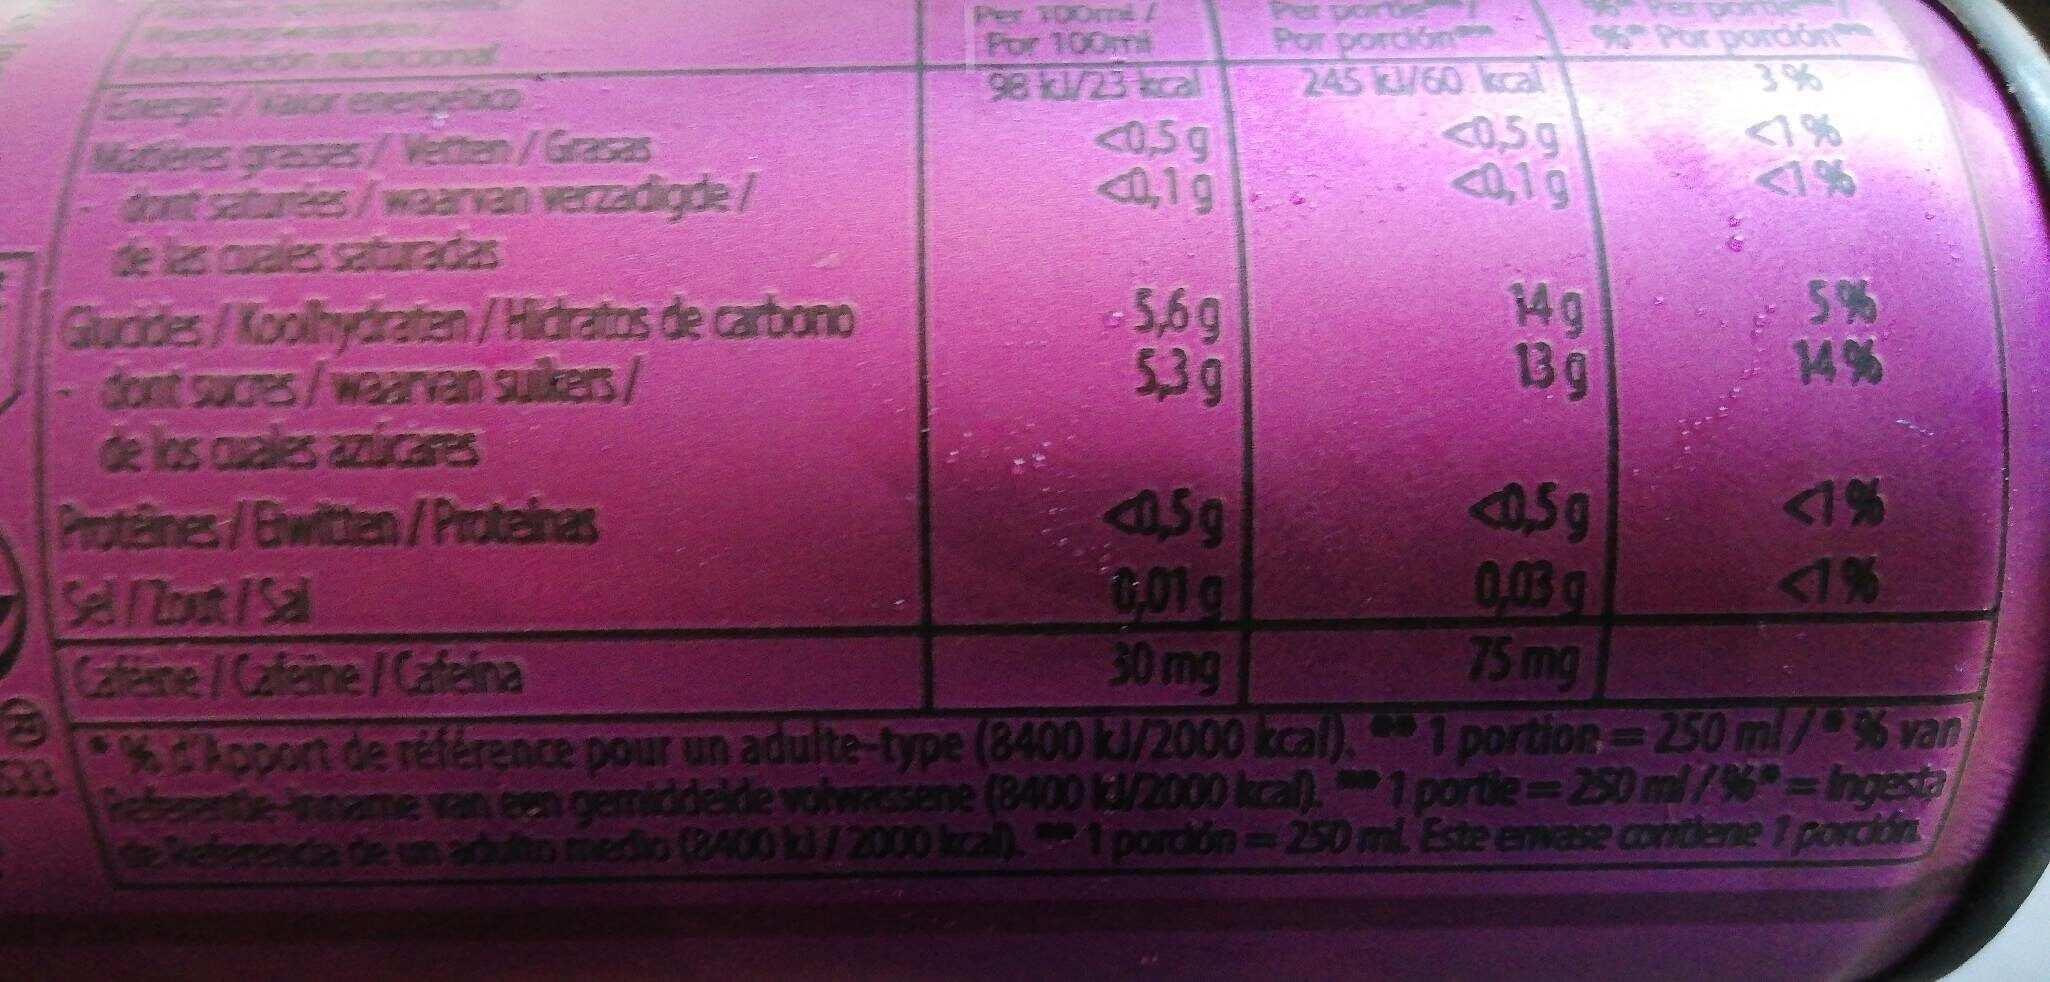 Yula acai berry spice - Nutrition facts